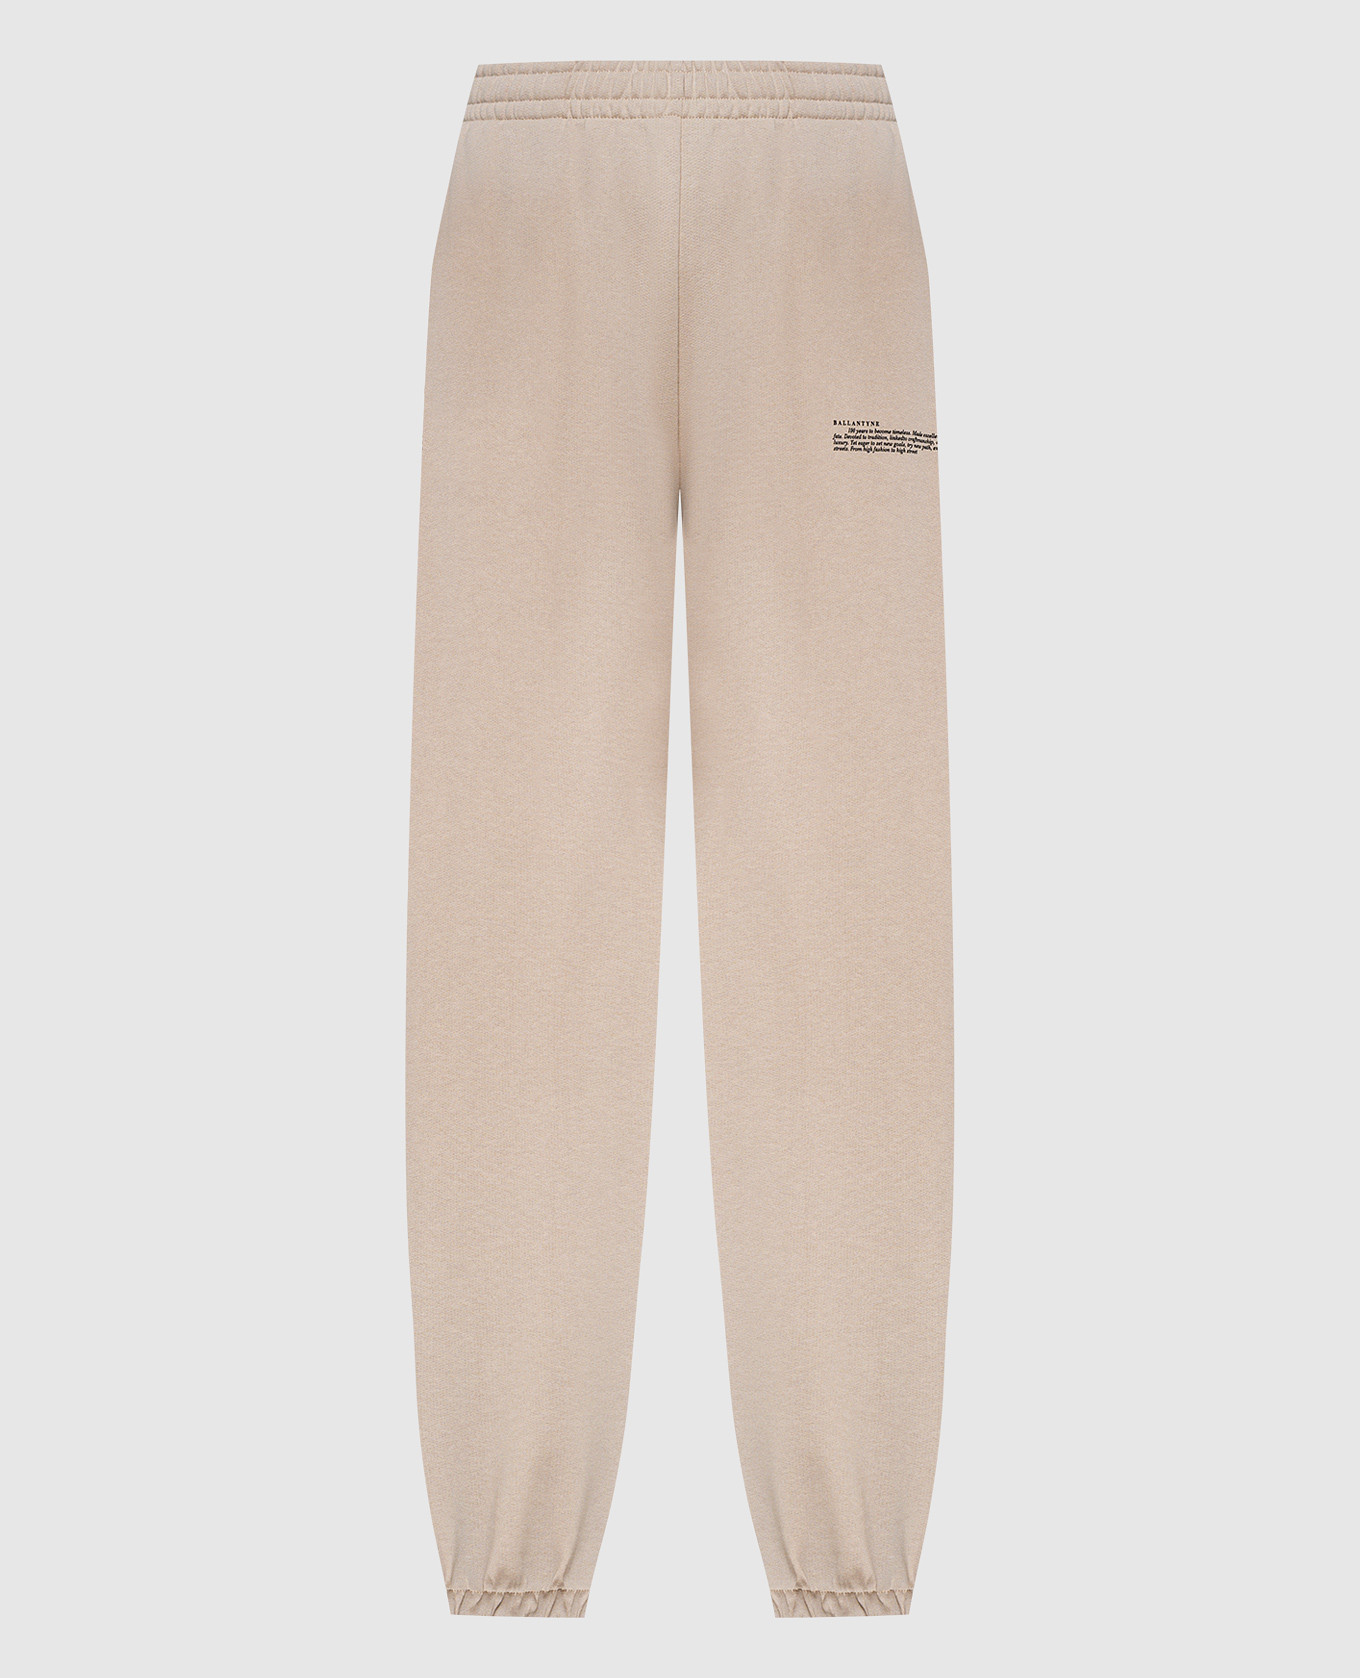 Beige joggers with contrasting logo